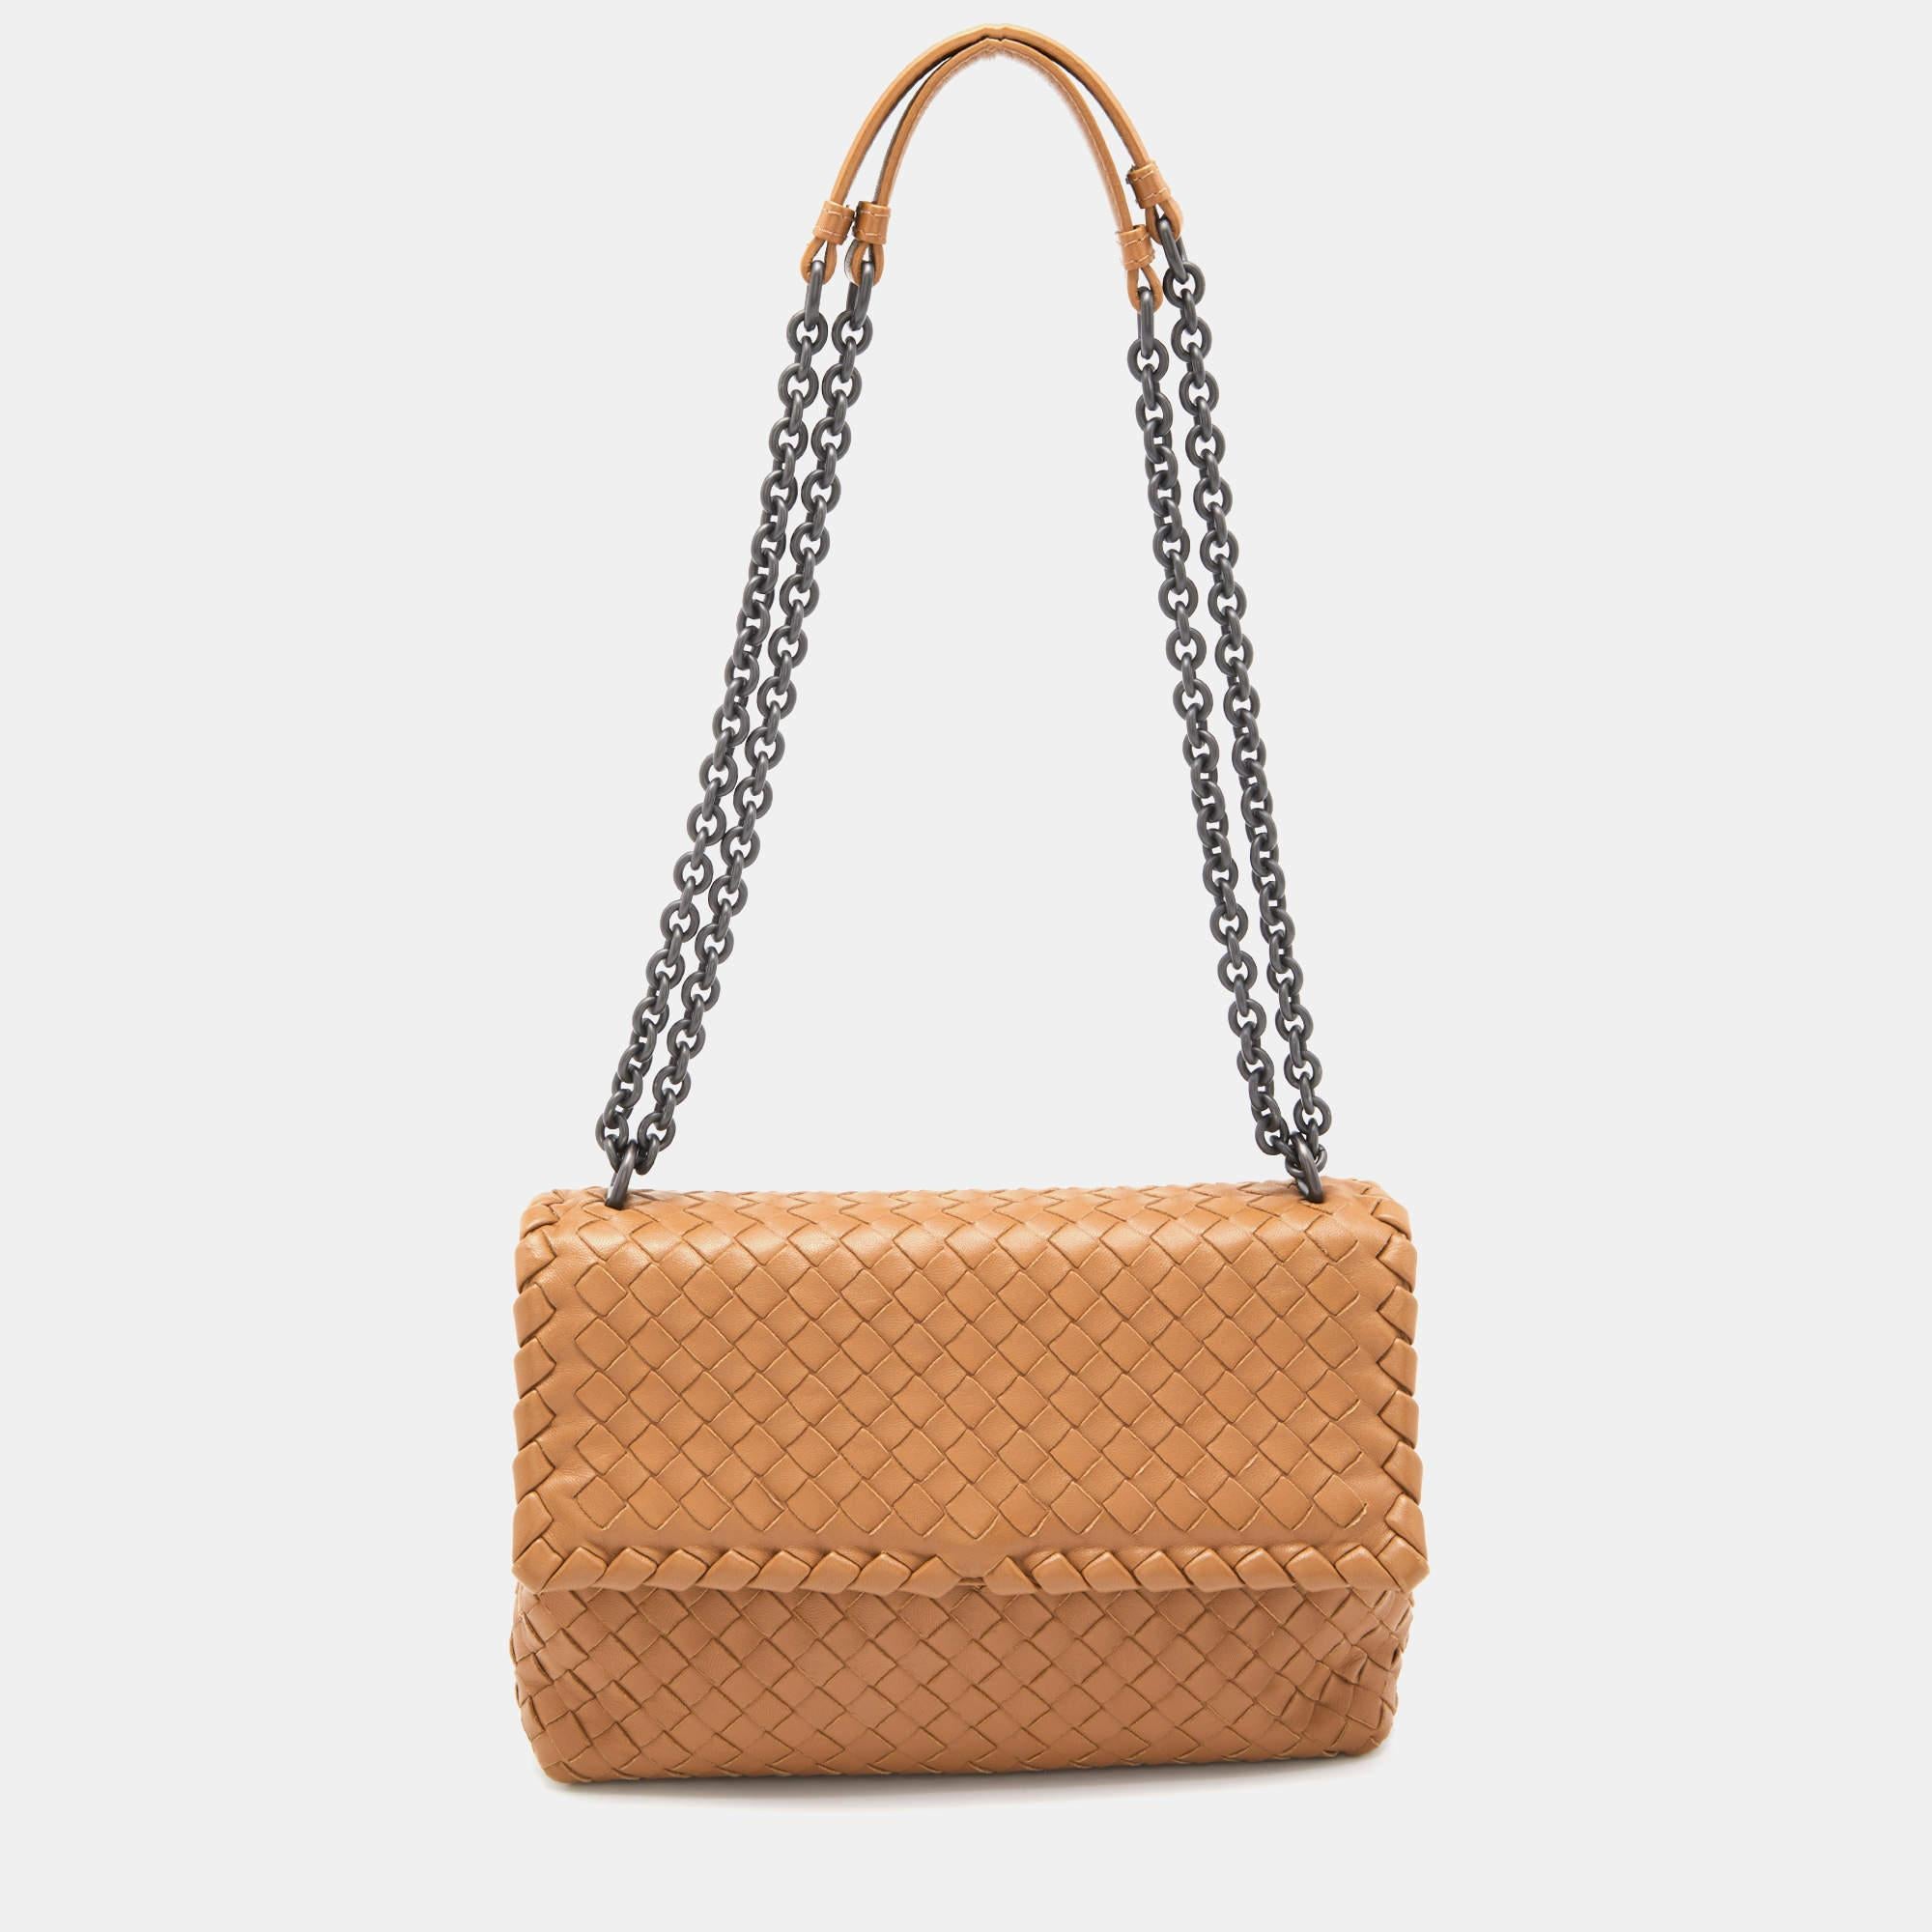 With this designer bag by your side, it's going to be a stylish OOTD, no matter the day. Its classy shape, notable details, and simple elegance make it a worthy purchase and a versatile accessory.

Includes: Mirror, Info Booklet